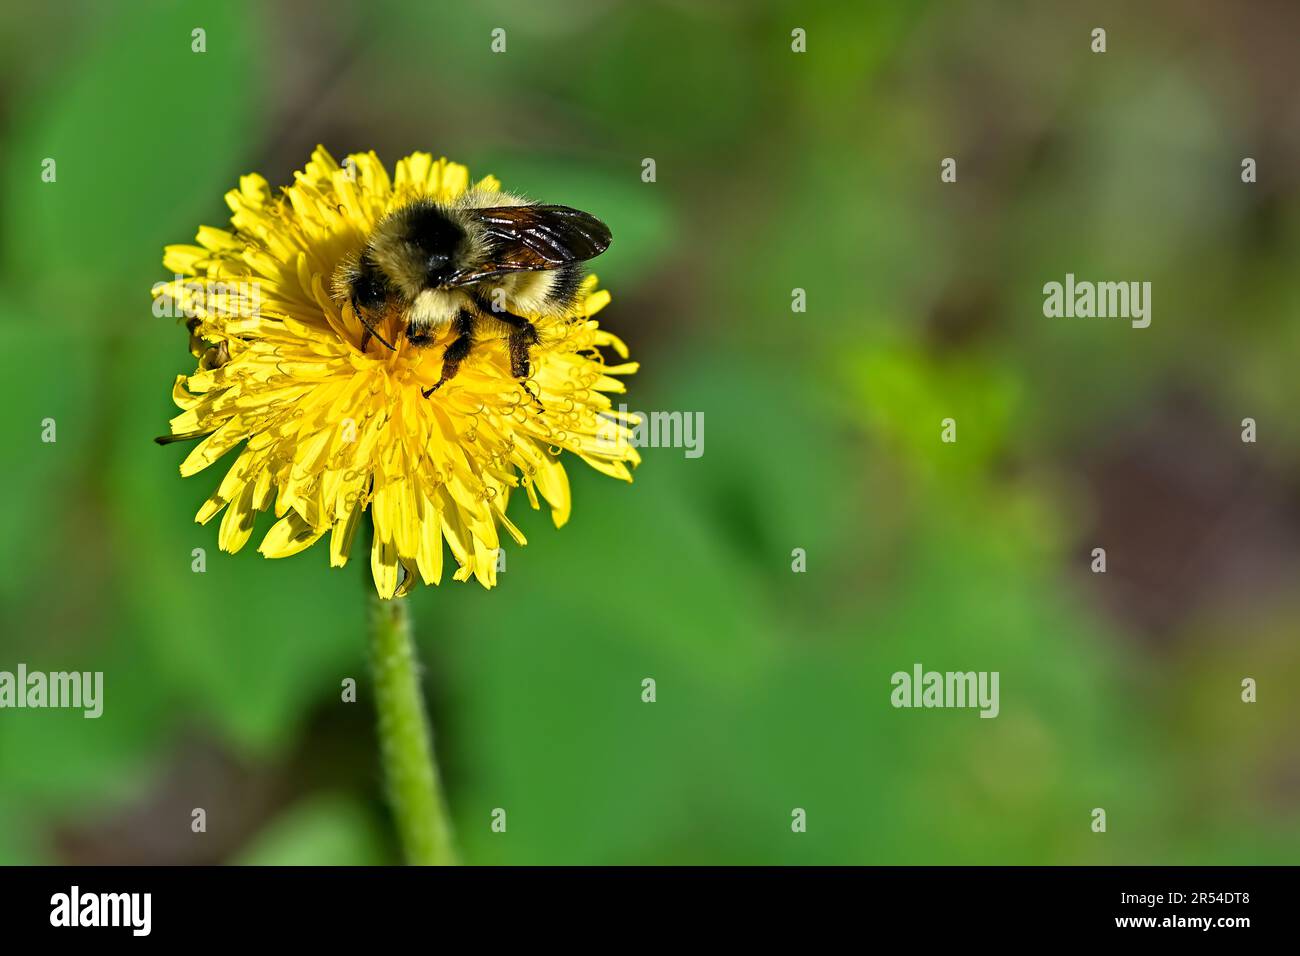 A Bumble Bee drinking nectar from a wild dandelion flower Stock Photo